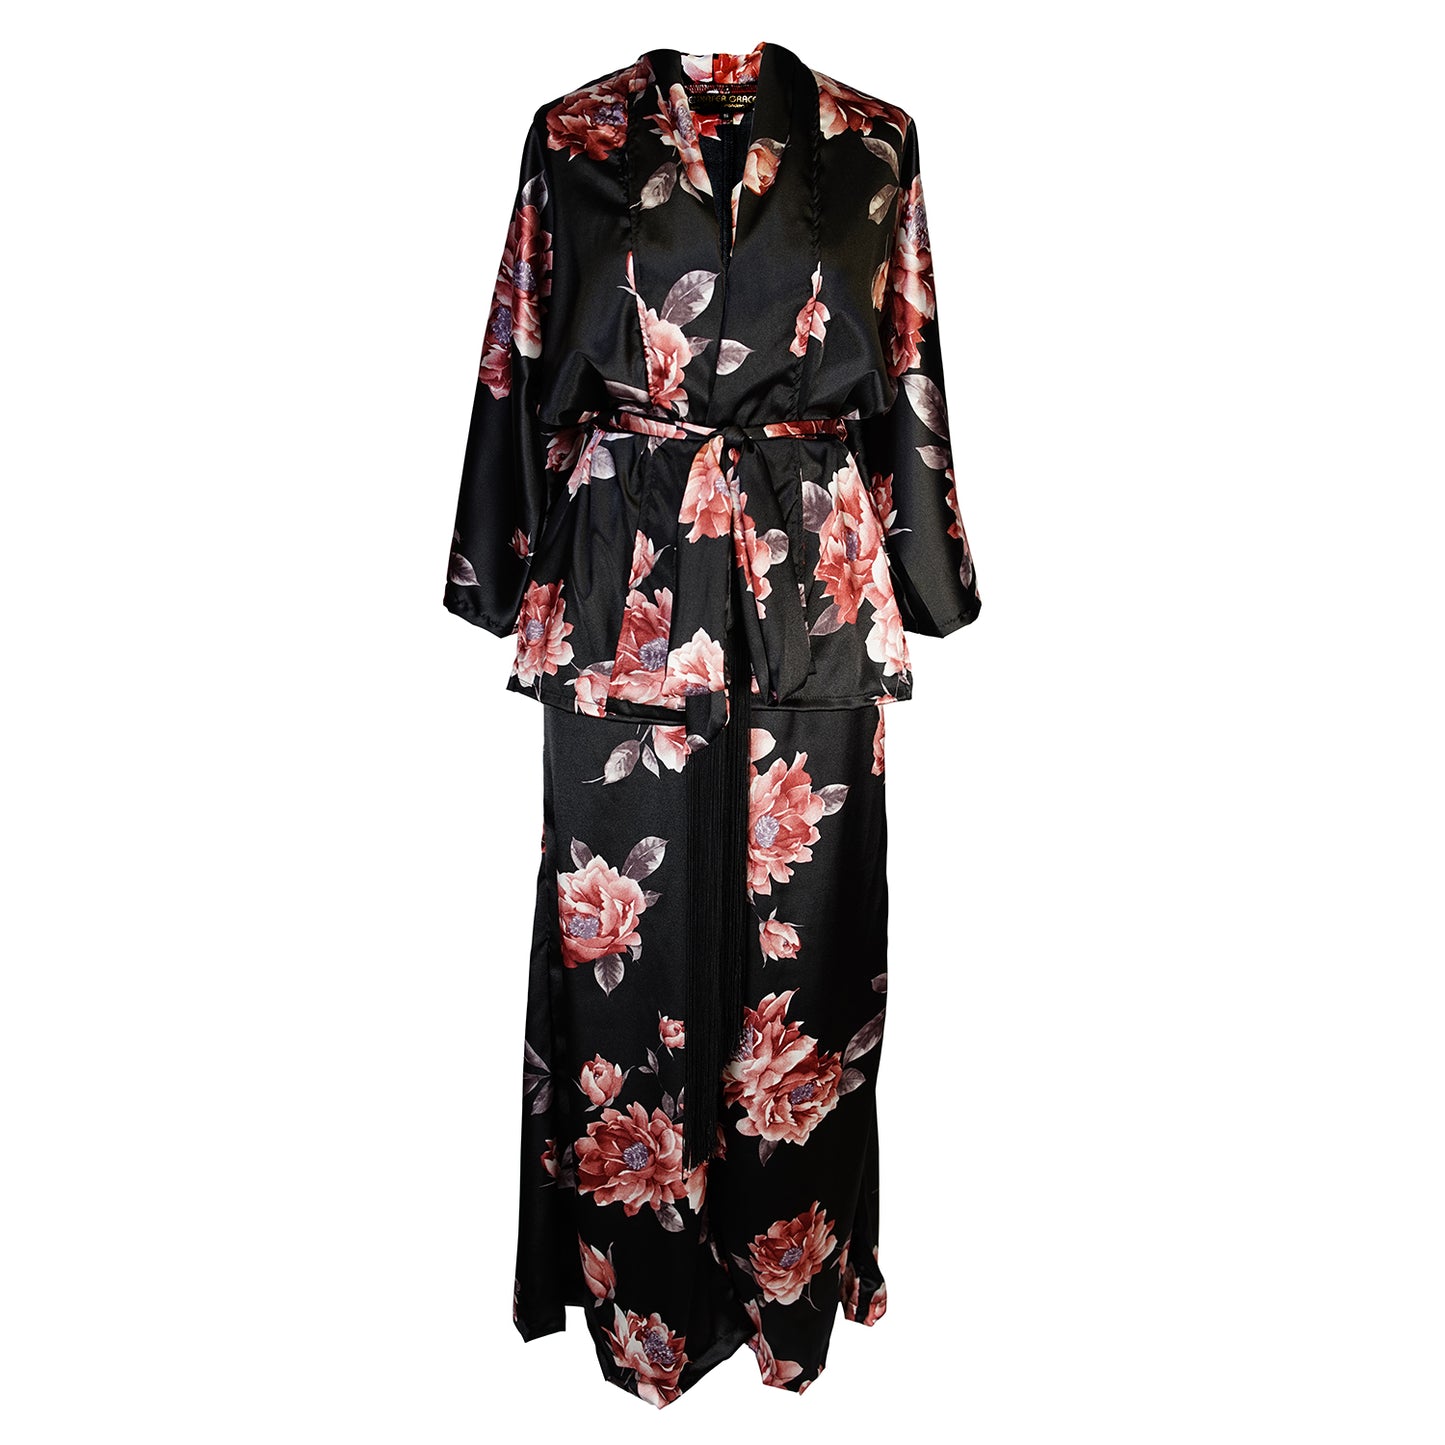 Loungewear set in dark floral pattern. A black background with light pink flowers, this set comes with a wrap dolman jacket.  Sleeves have a forearm hem, and it can be worn as an open jacket or wrap with matching tie belt. The belt features fringe tassels. The matching pants have pockets and an ankle length hem. 